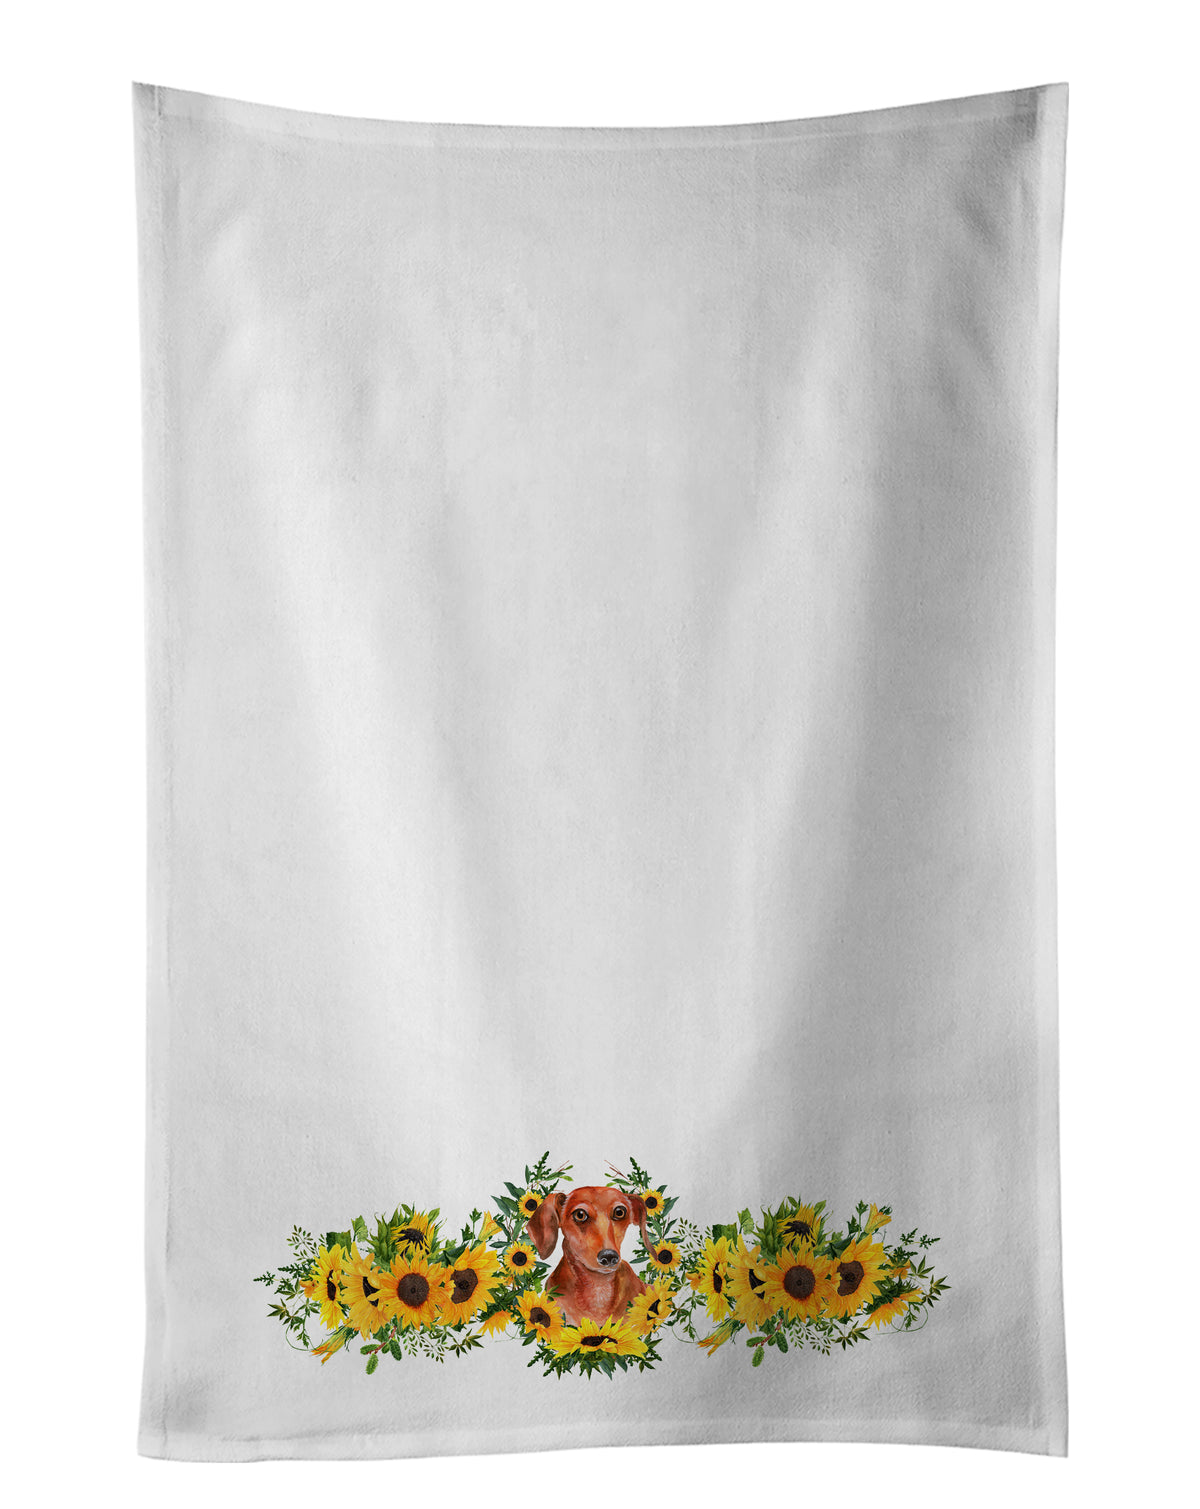 Buy this Red Dachshund in Sunflowers White Kitchen Towel Set of 2